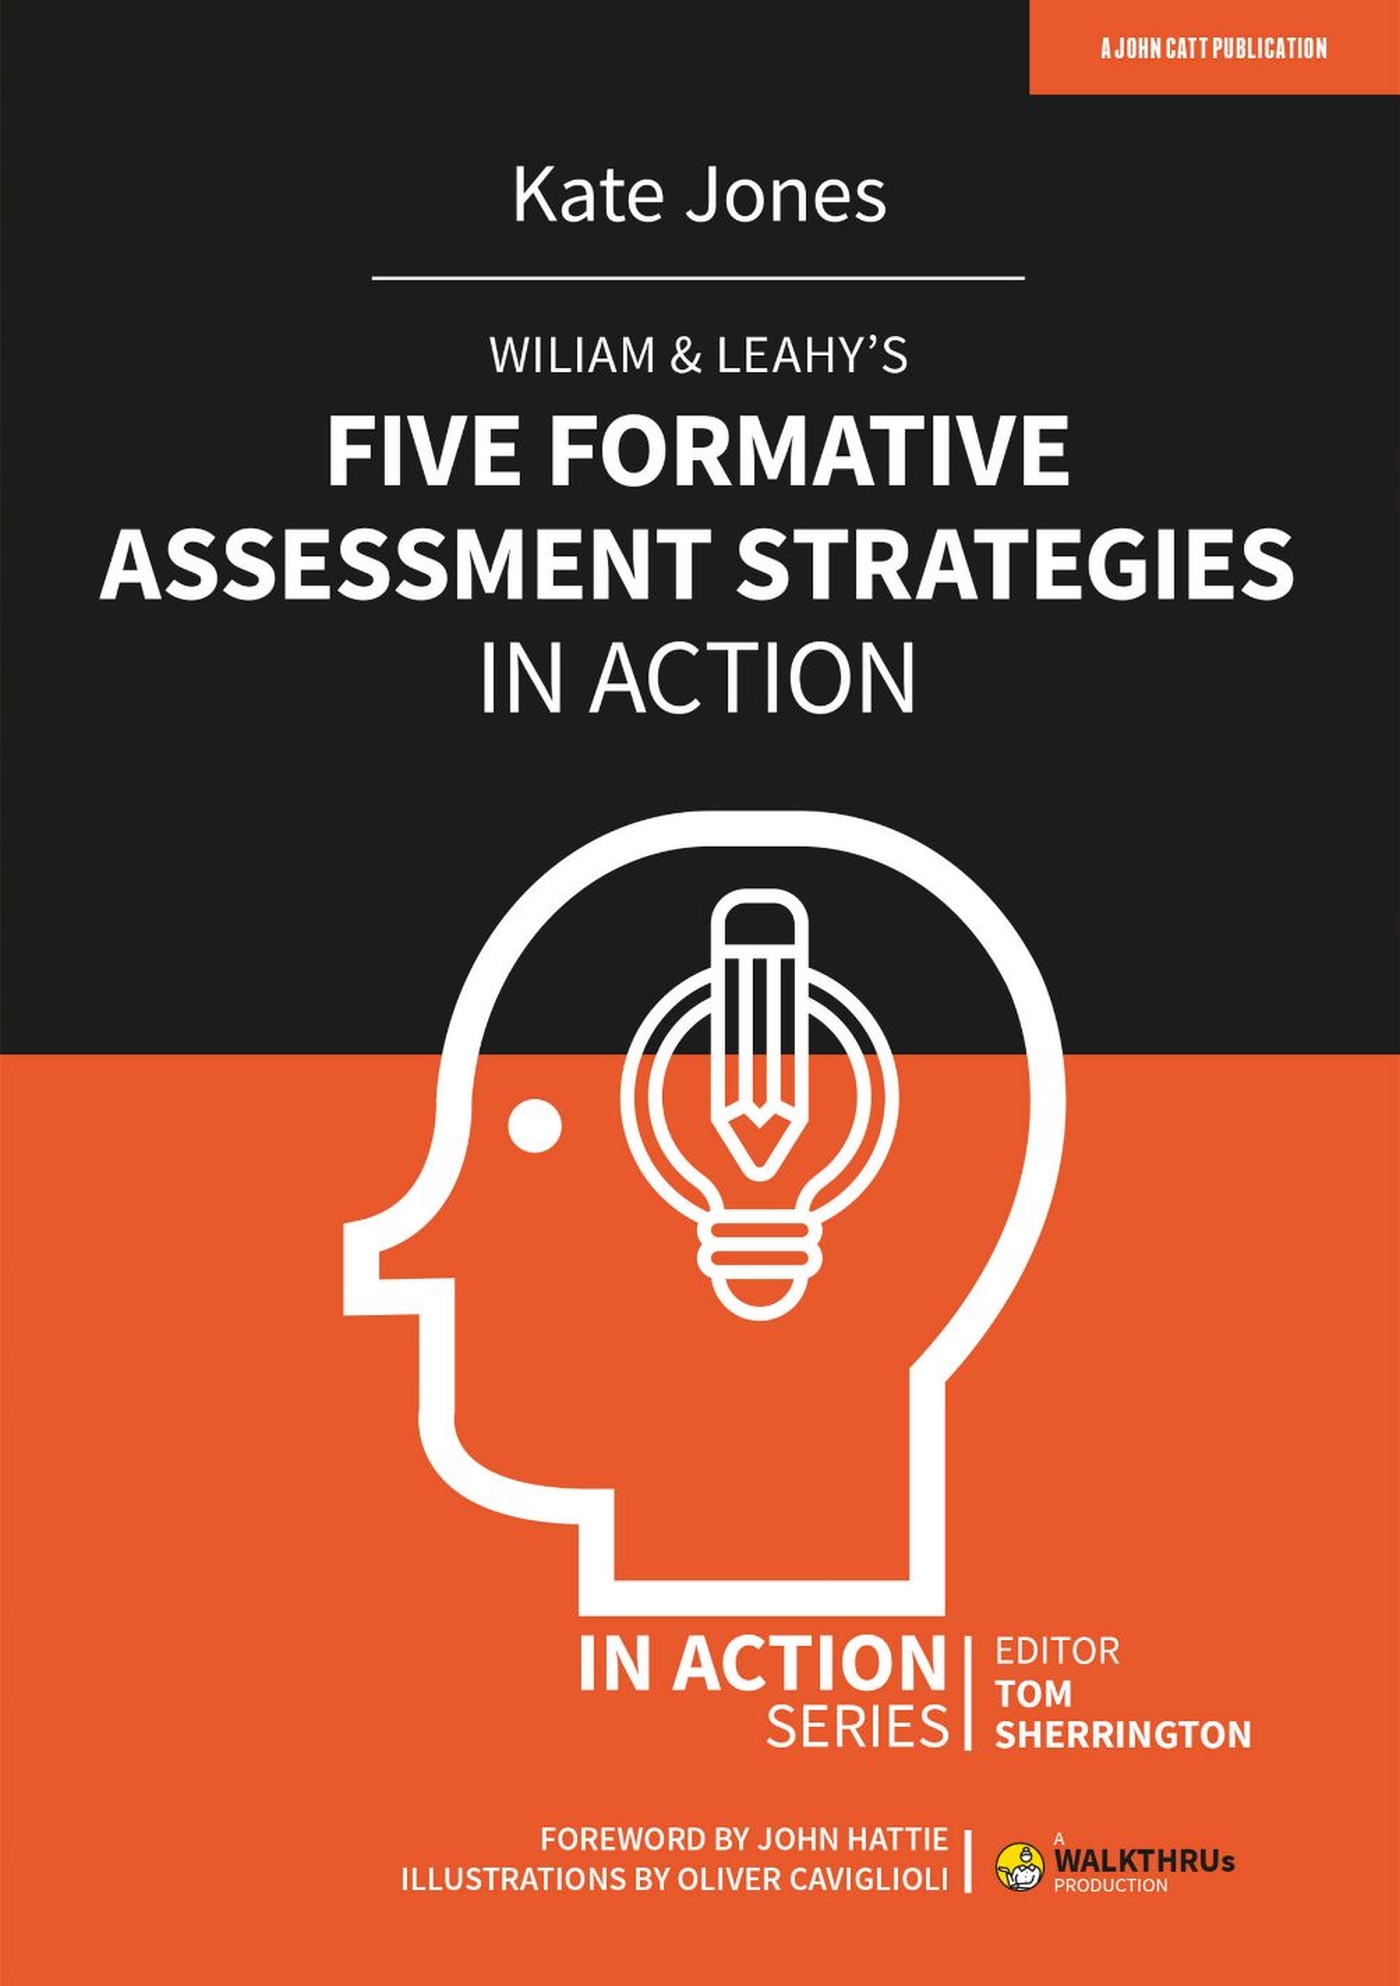 Wiliam & Leahy's Five Formative Assessment Strategies in Action